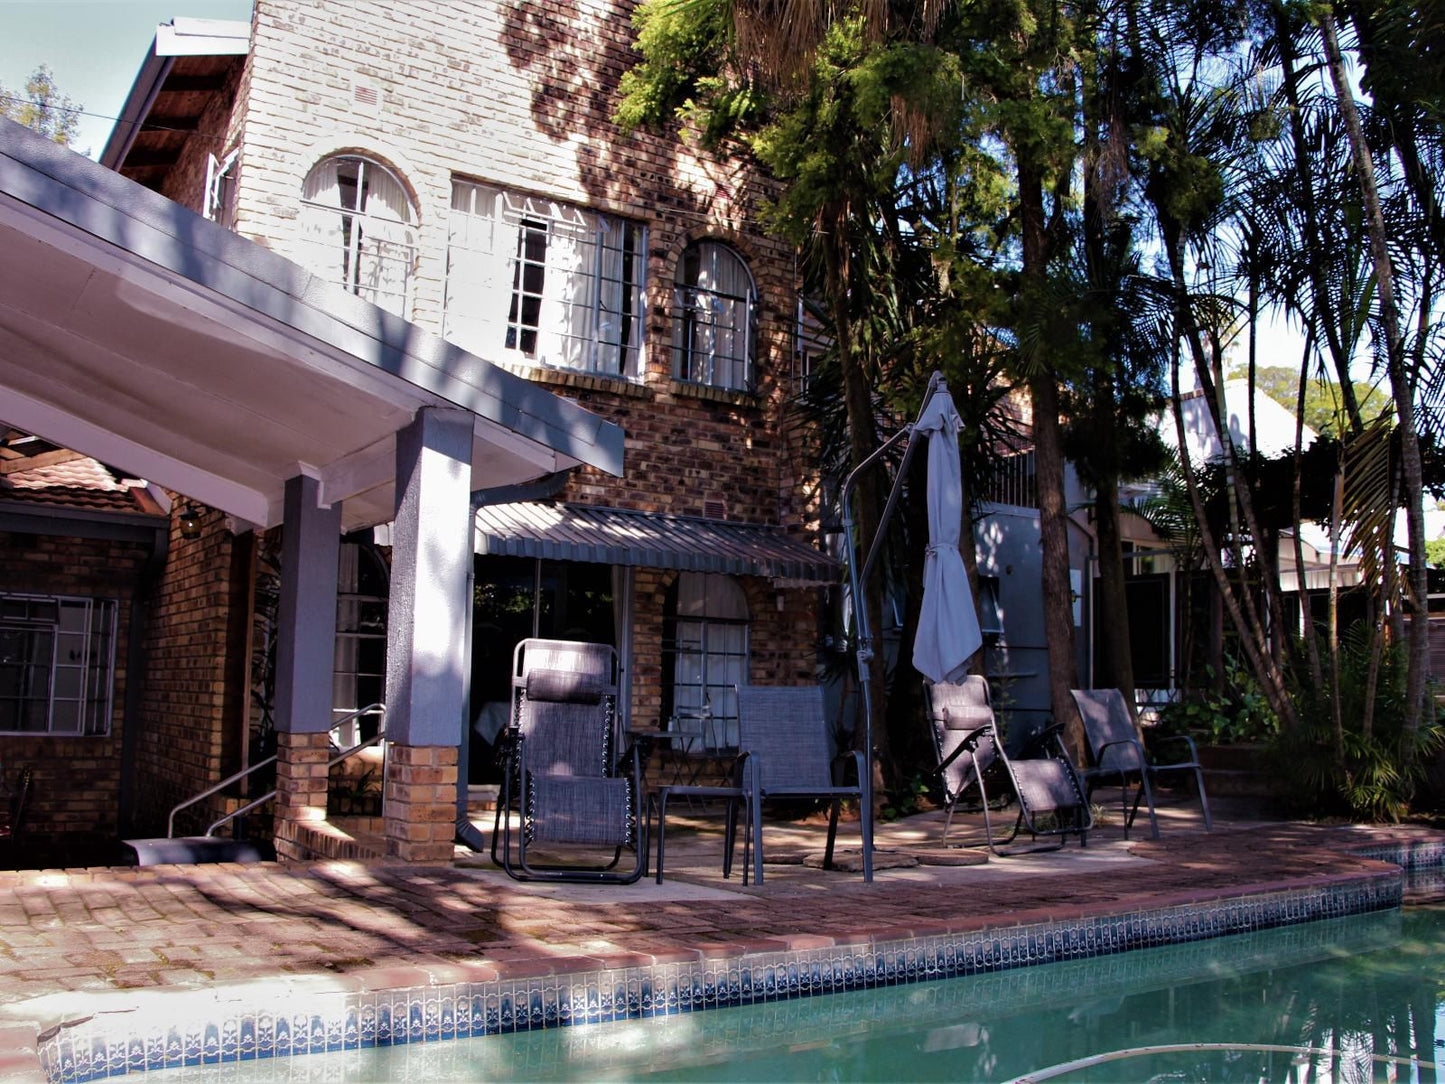 Kruger S Guest House White River Mpumalanga South Africa House, Building, Architecture, Palm Tree, Plant, Nature, Wood, Swimming Pool